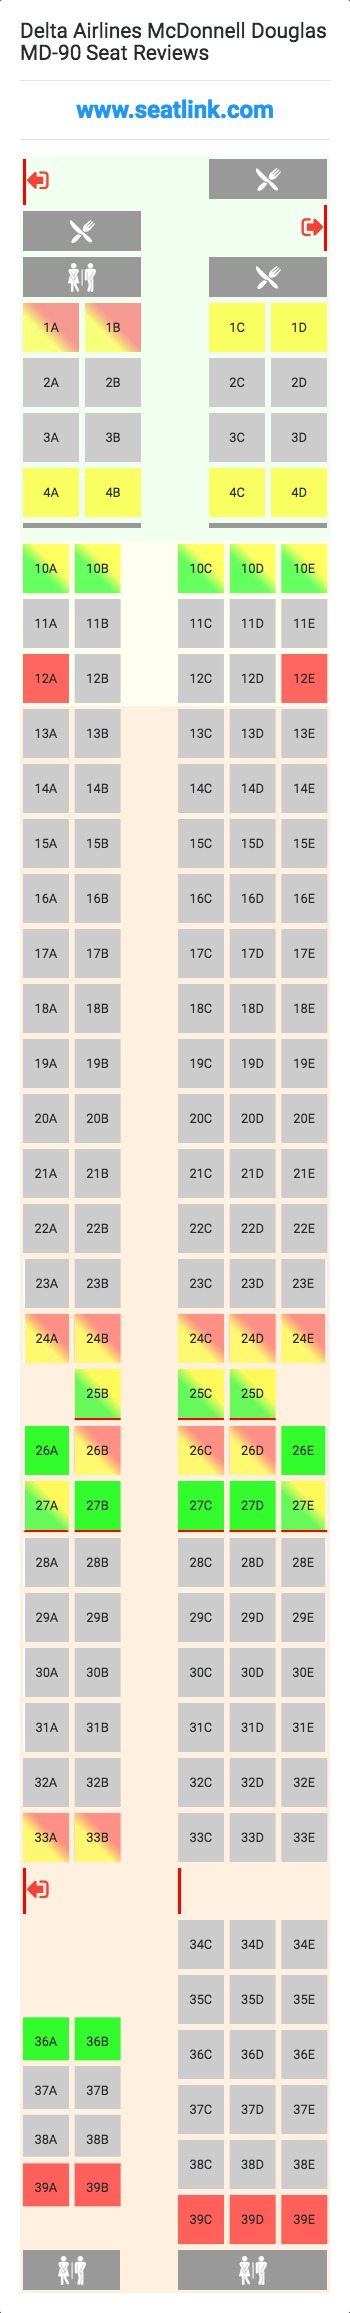 Delta Md 90 Seating Chart